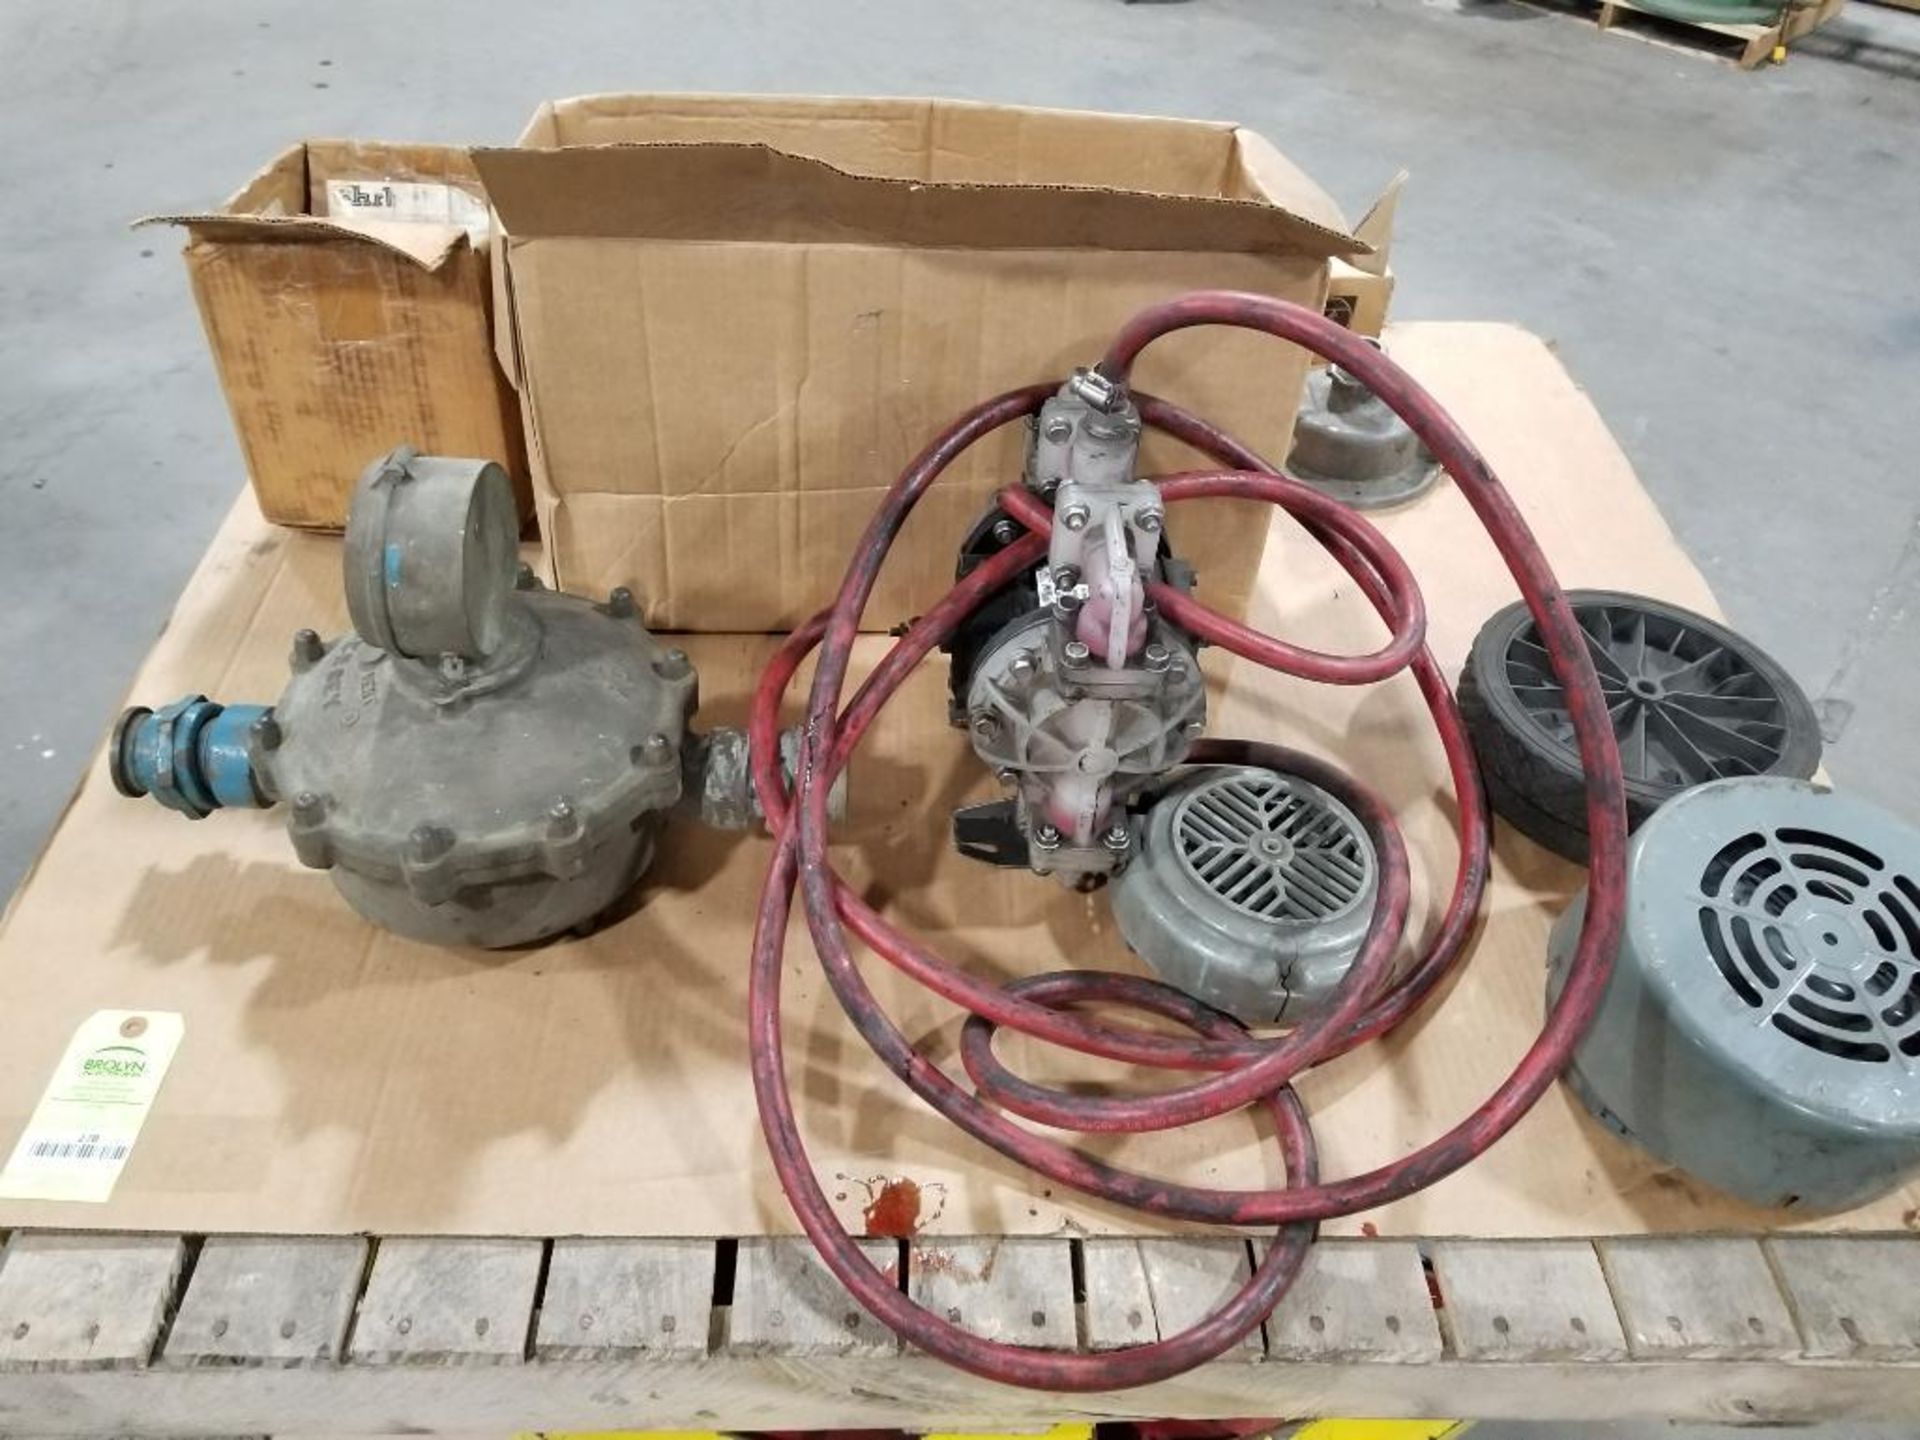 Assorted pumps and valves.